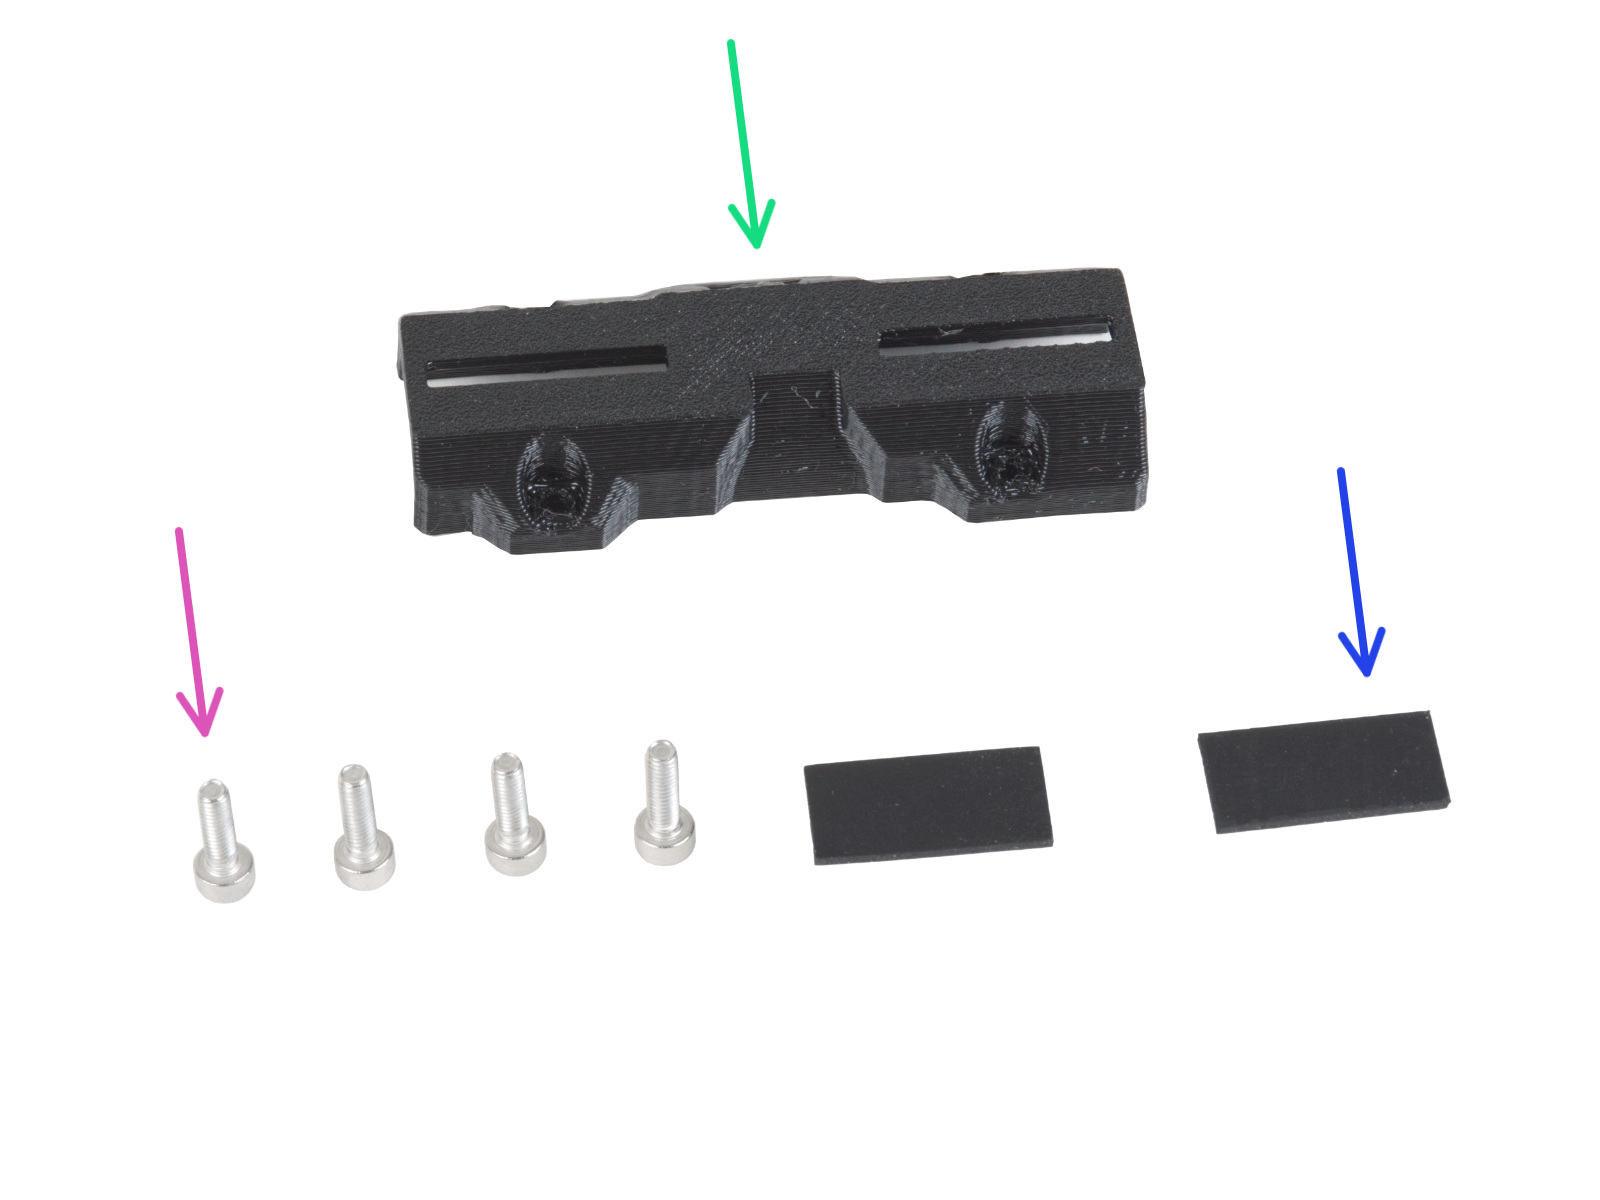 Assembling the X-carriage-clip: parts preparation